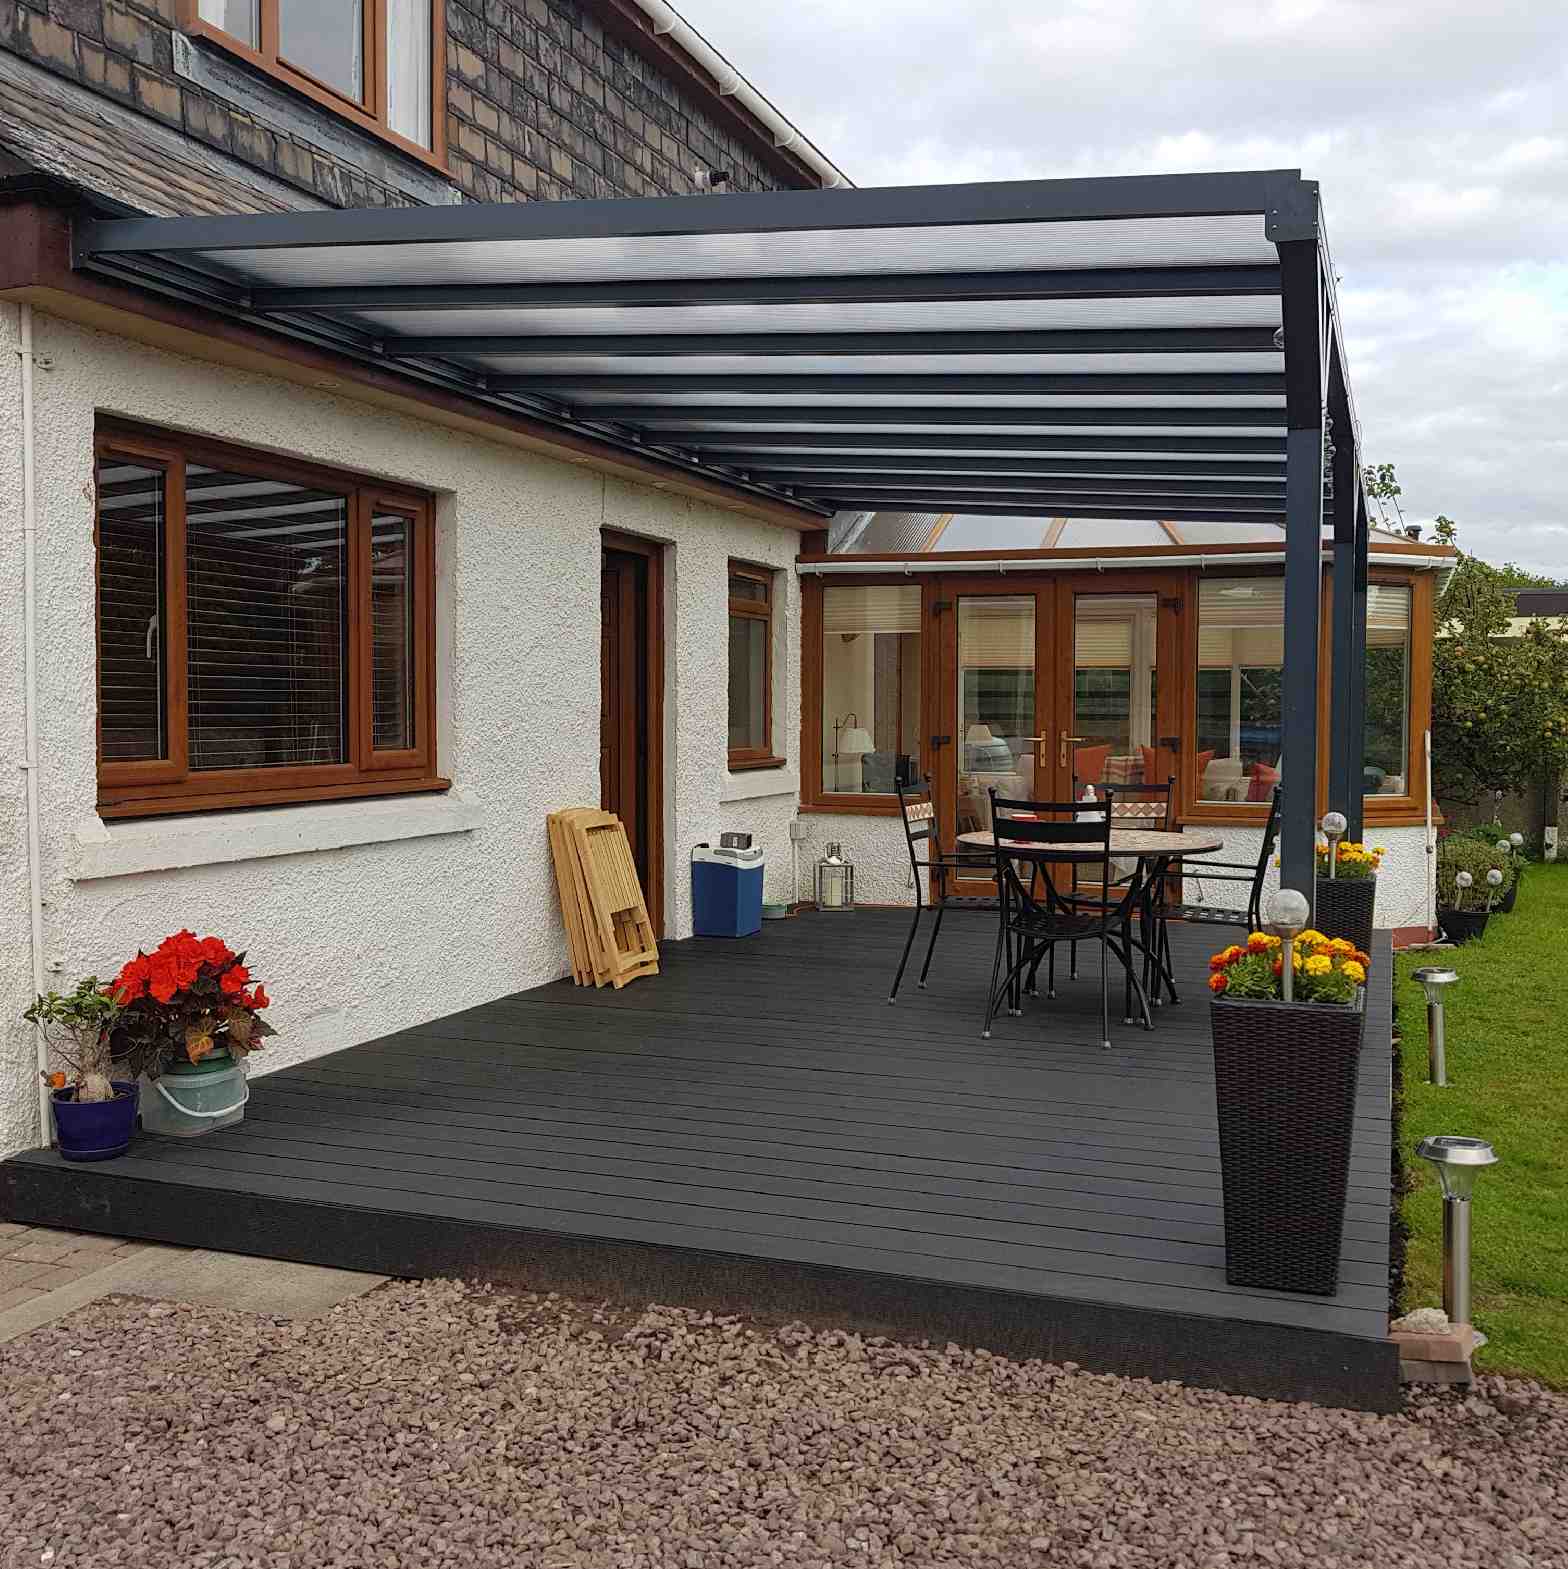 Buy Omega Verandah, Anthracite Grey, 16mm Polycarbonate Glazing - 2.8m (W) x 4.0m(P), (2) Supporting Posts online today